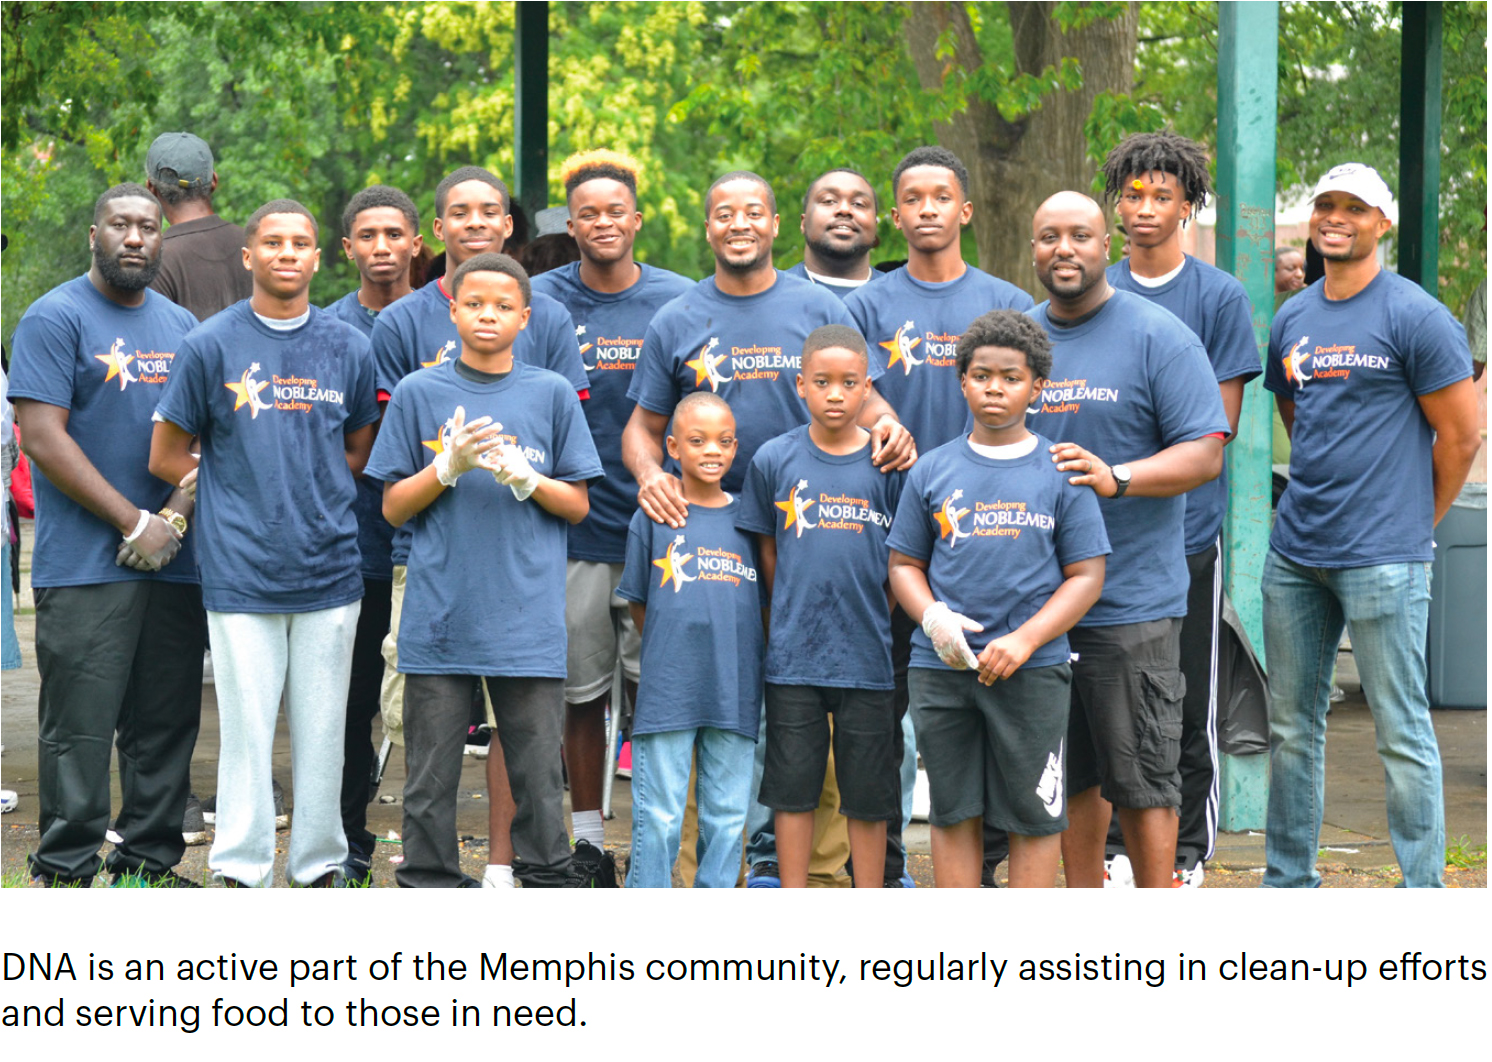 Group Photo | DNA is an active part of the Memphis community, regularly assisting in clean-up efforts and serving food to those in need.